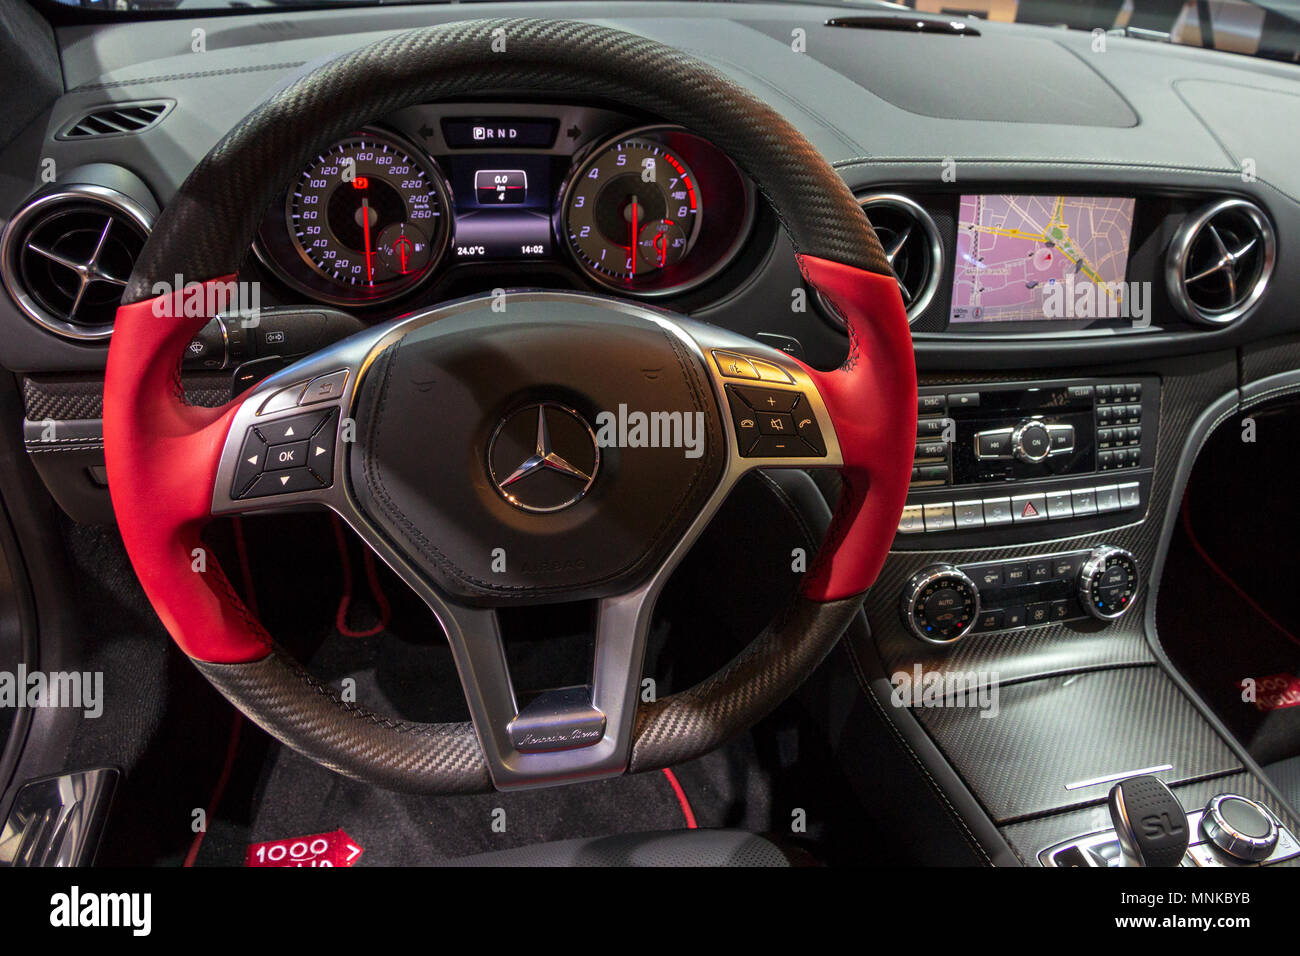 FRANKFURT, GERMANY - SEP 16, 2015: Interior view of a special edition Mille Miglia Mercedes AMG SL sports car showcased at the Frankfurt IAA Motor Sho Stock Photo